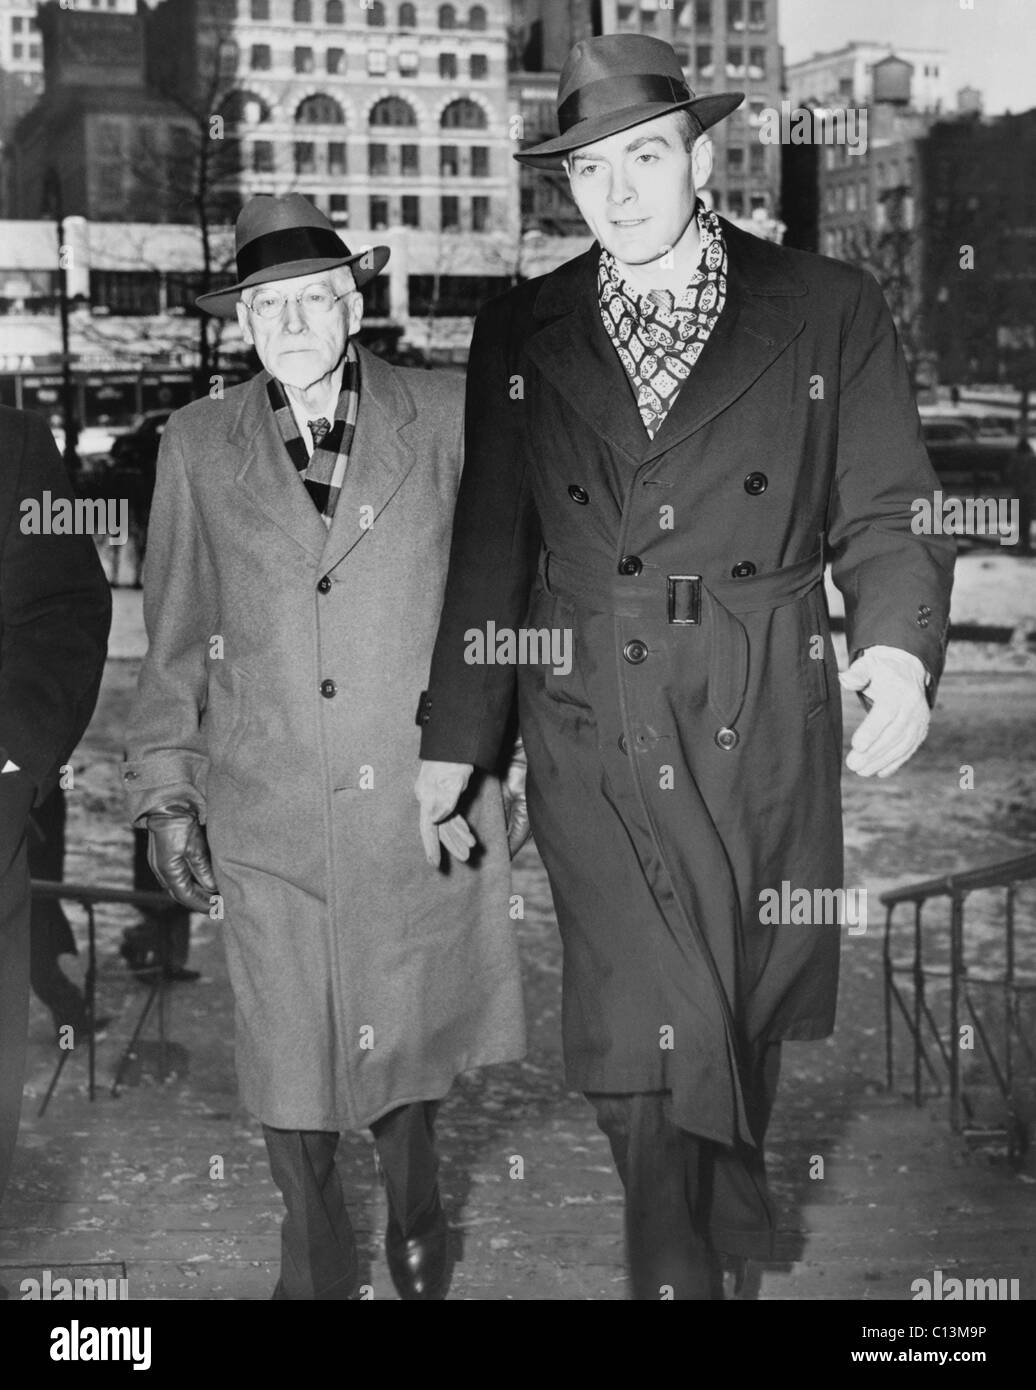 William Walter Remington 1917-1954 on right was an U.S. government economist accused of espionage by the Soviet spy and defector Elizabeth Bentley. He was convicted of perjury and murdered while serving his sentence in Lewisburg Federal Penitentiary i Stock Photo